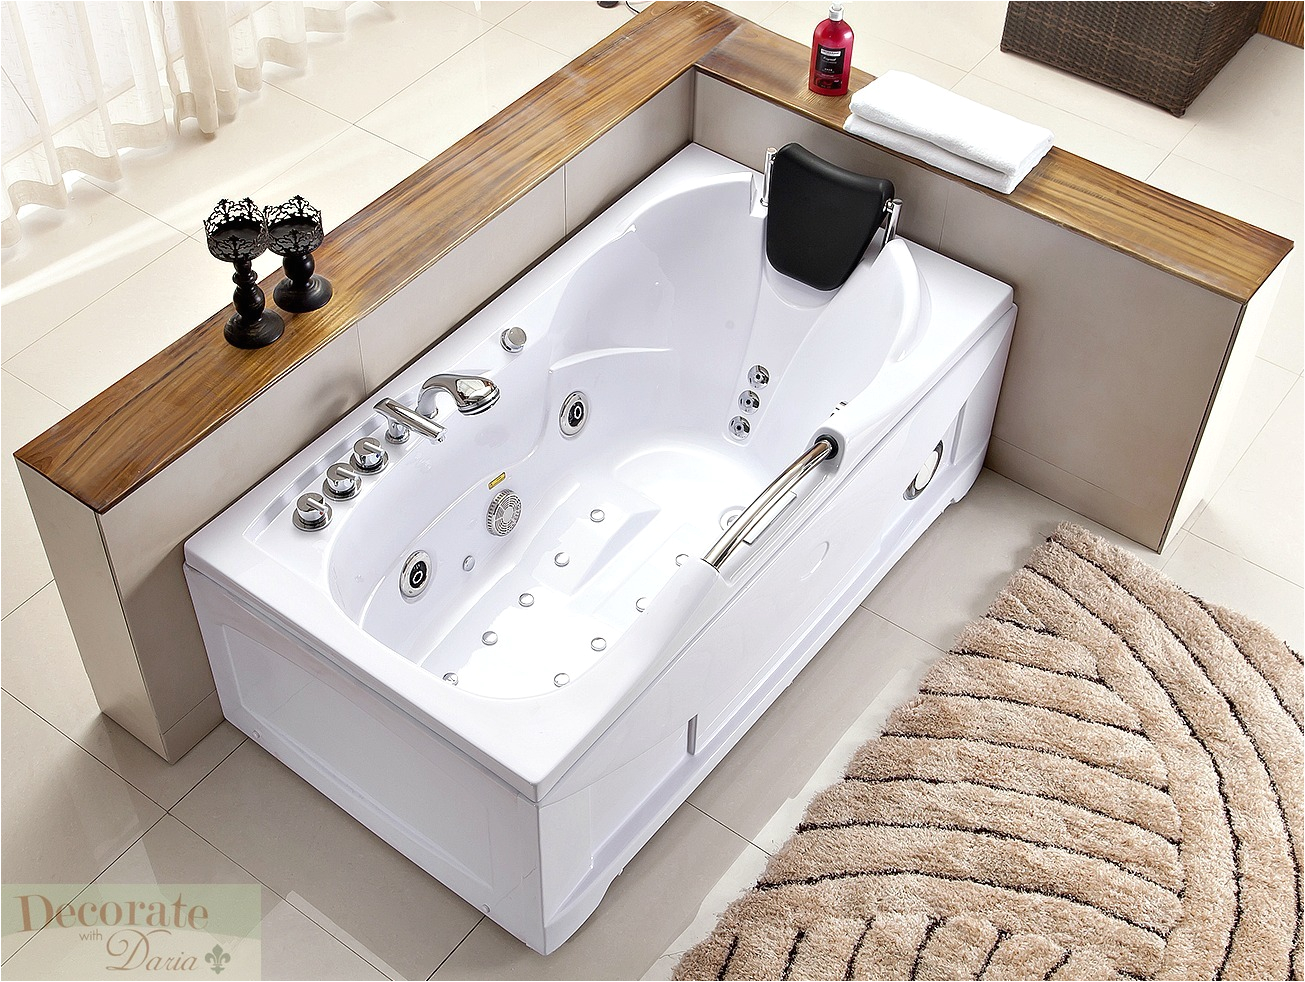 Jetted Heated Bathtub 60" White Bathtub Whirlpool Jetted Hydrotherapy 19 Massage